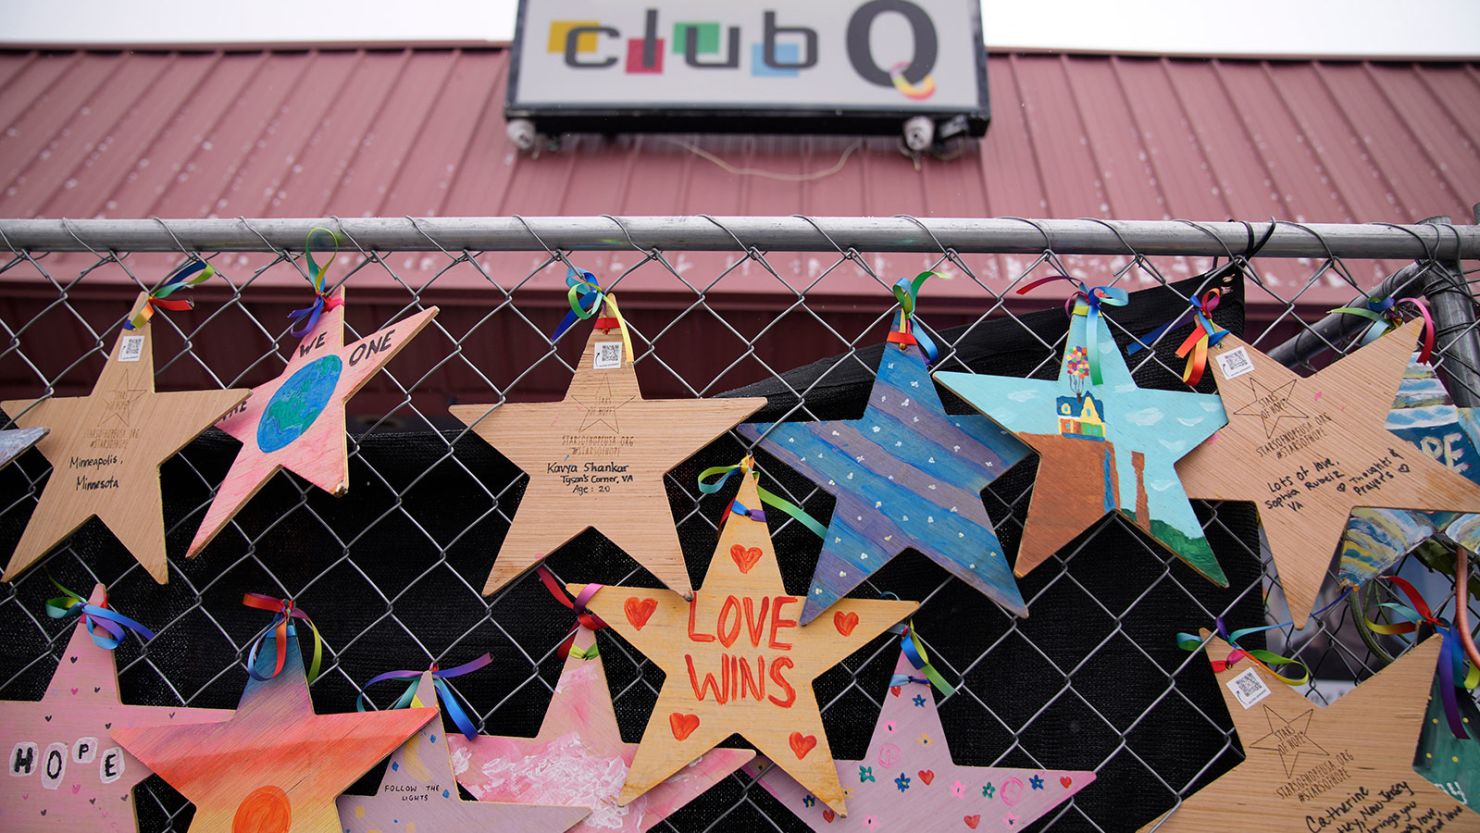 An exterior view of Club Q is seen on February 22, 2023, in Colorado Springs, Colorado.